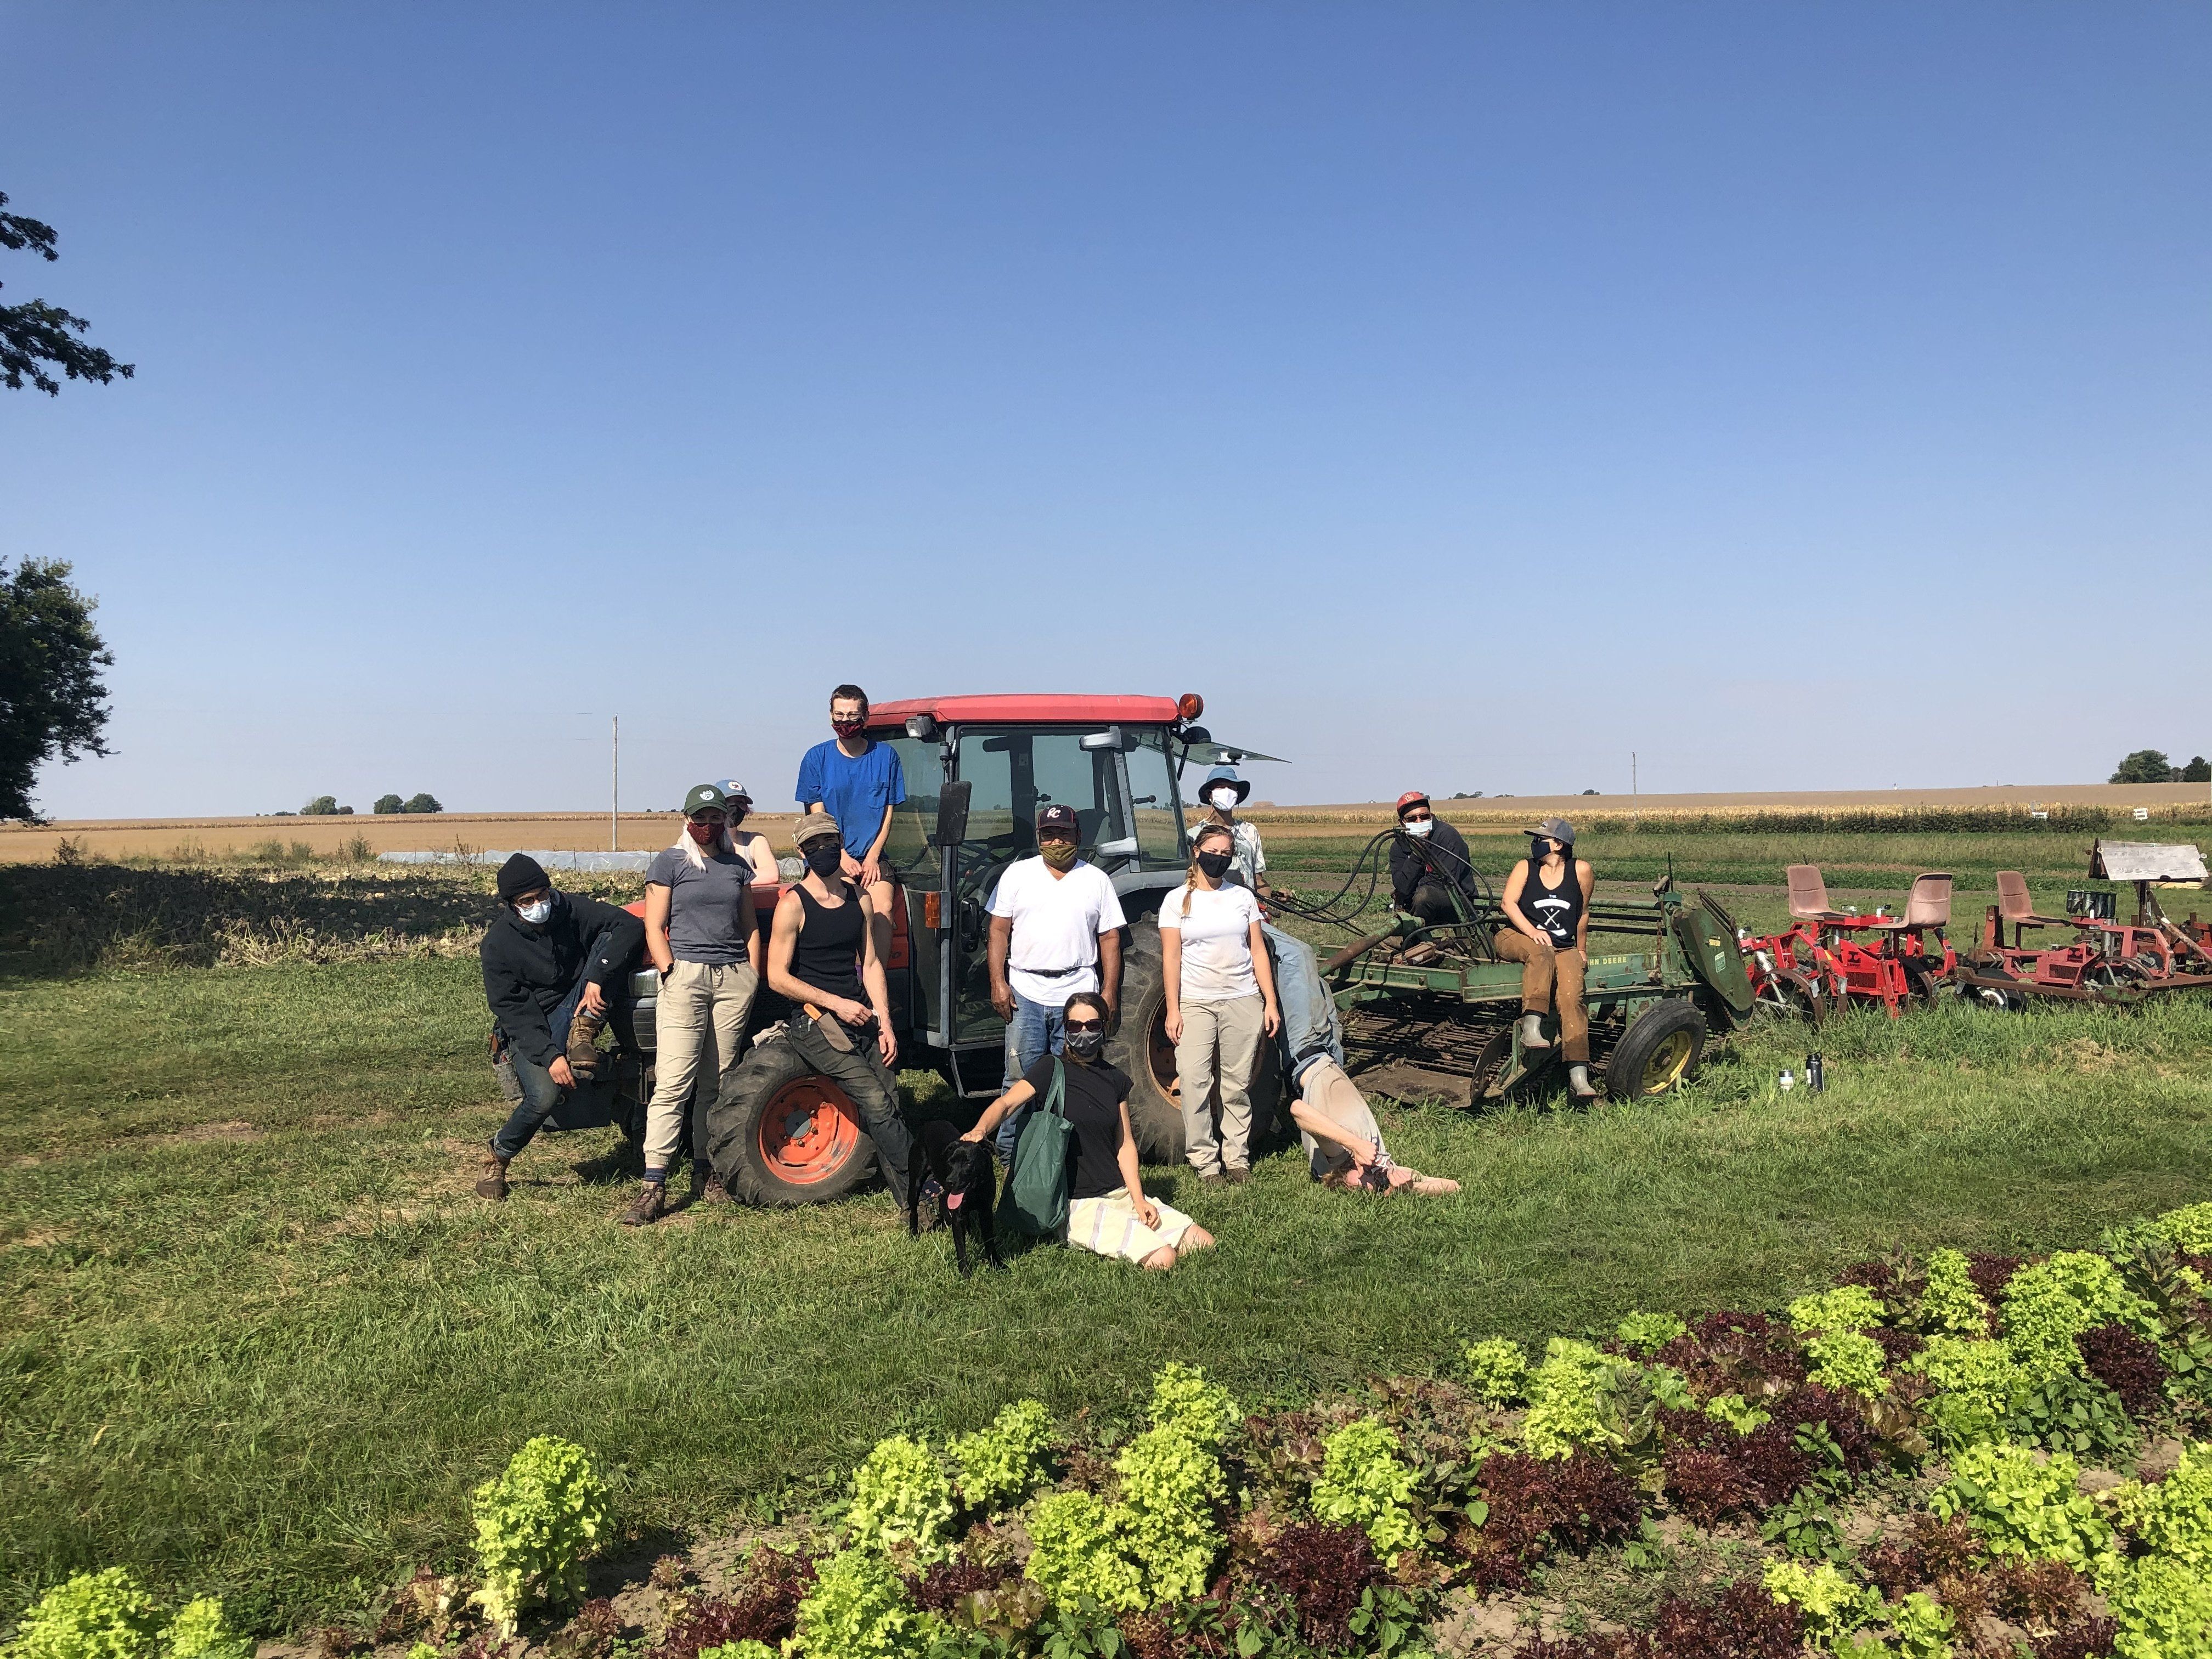 Next Happening: Farm Happenings for September 30, 2020: Fall CSA Shares Coming Soon